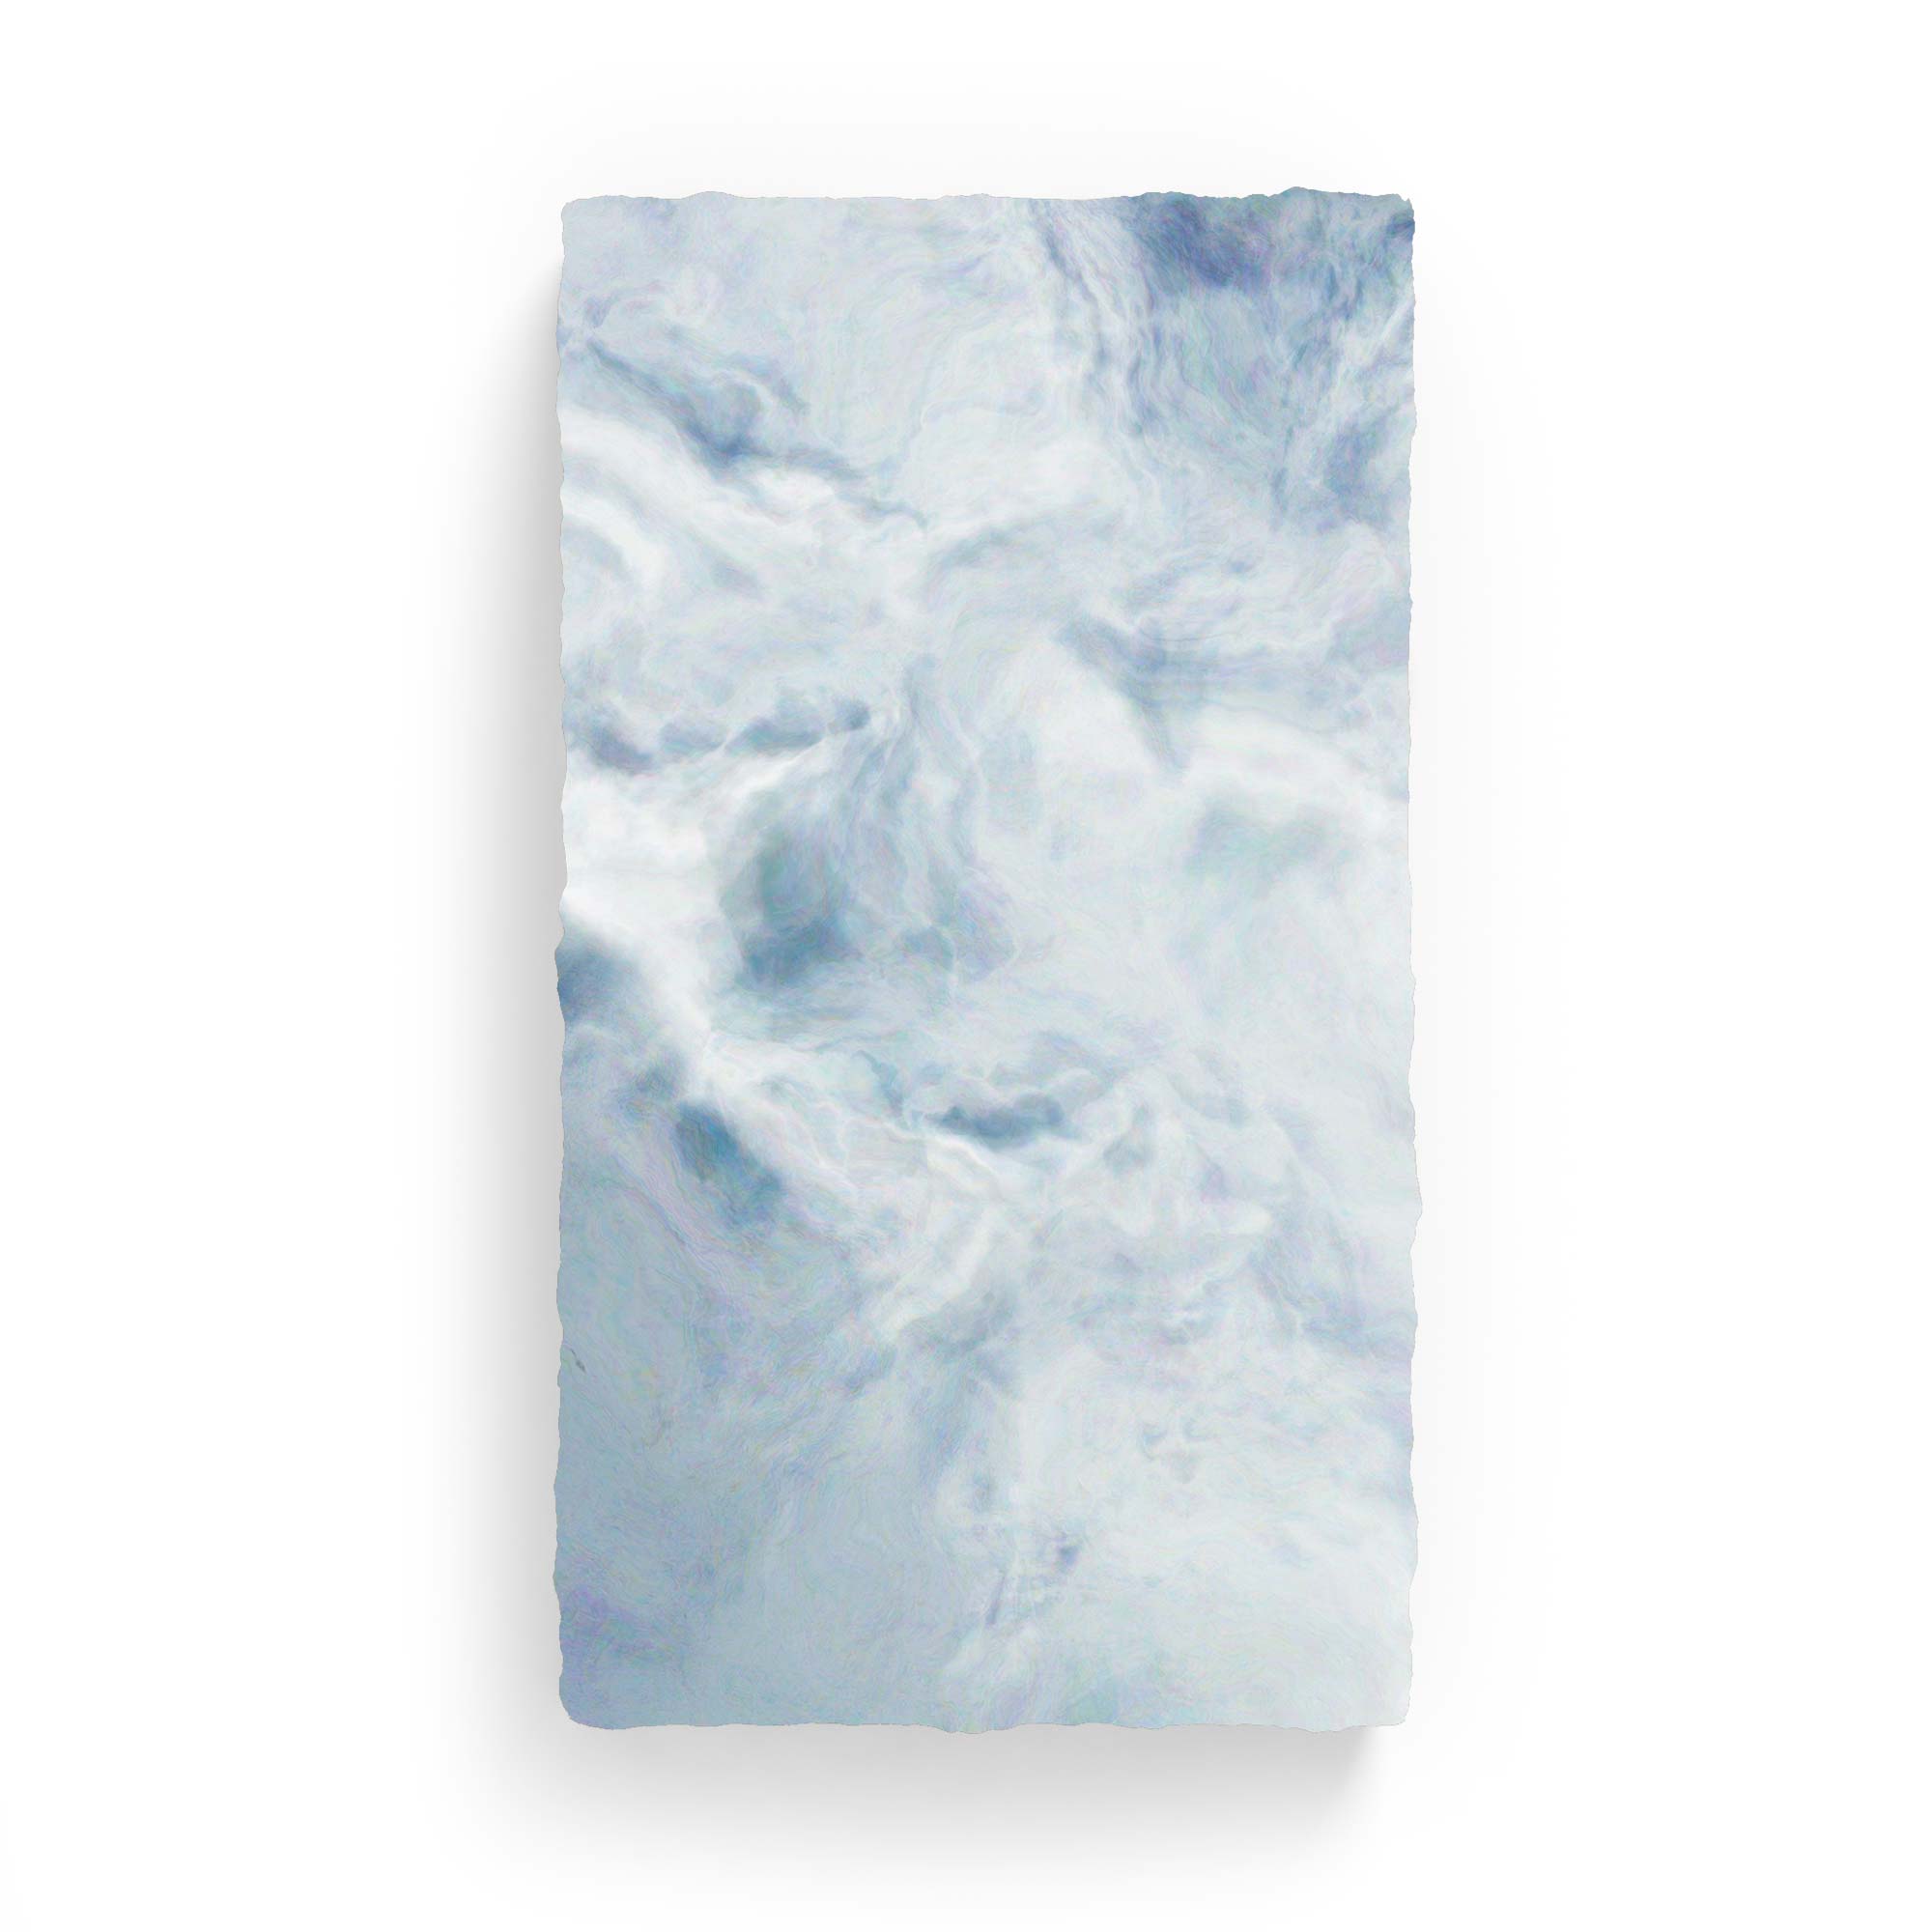 Early Grey Marble Soap Bar